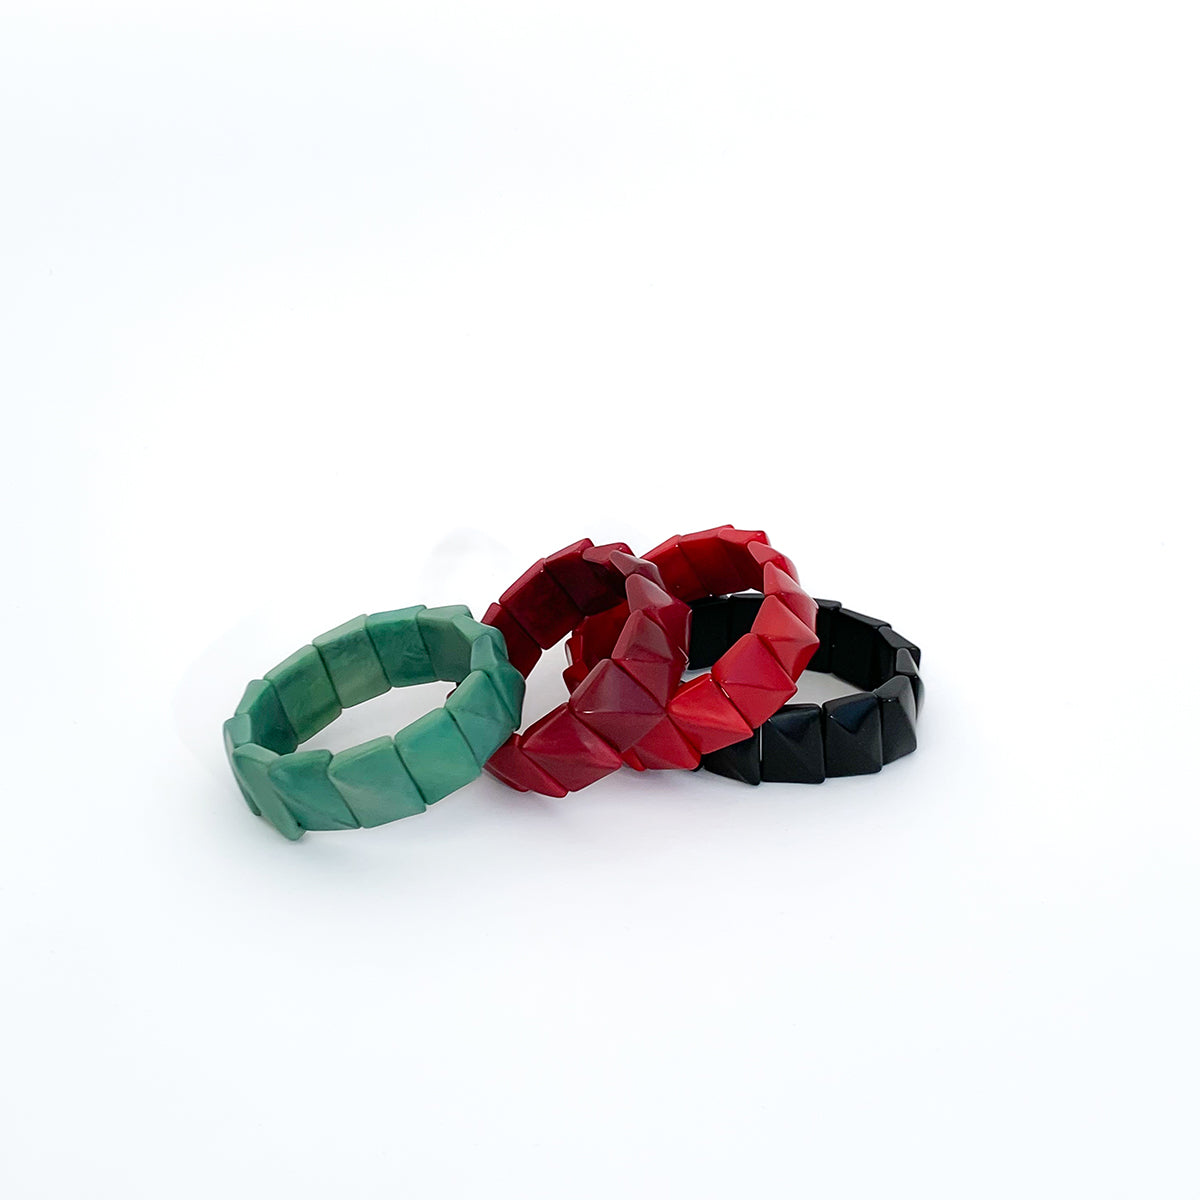 Modern and edgy bracelets made with tagua nut beads